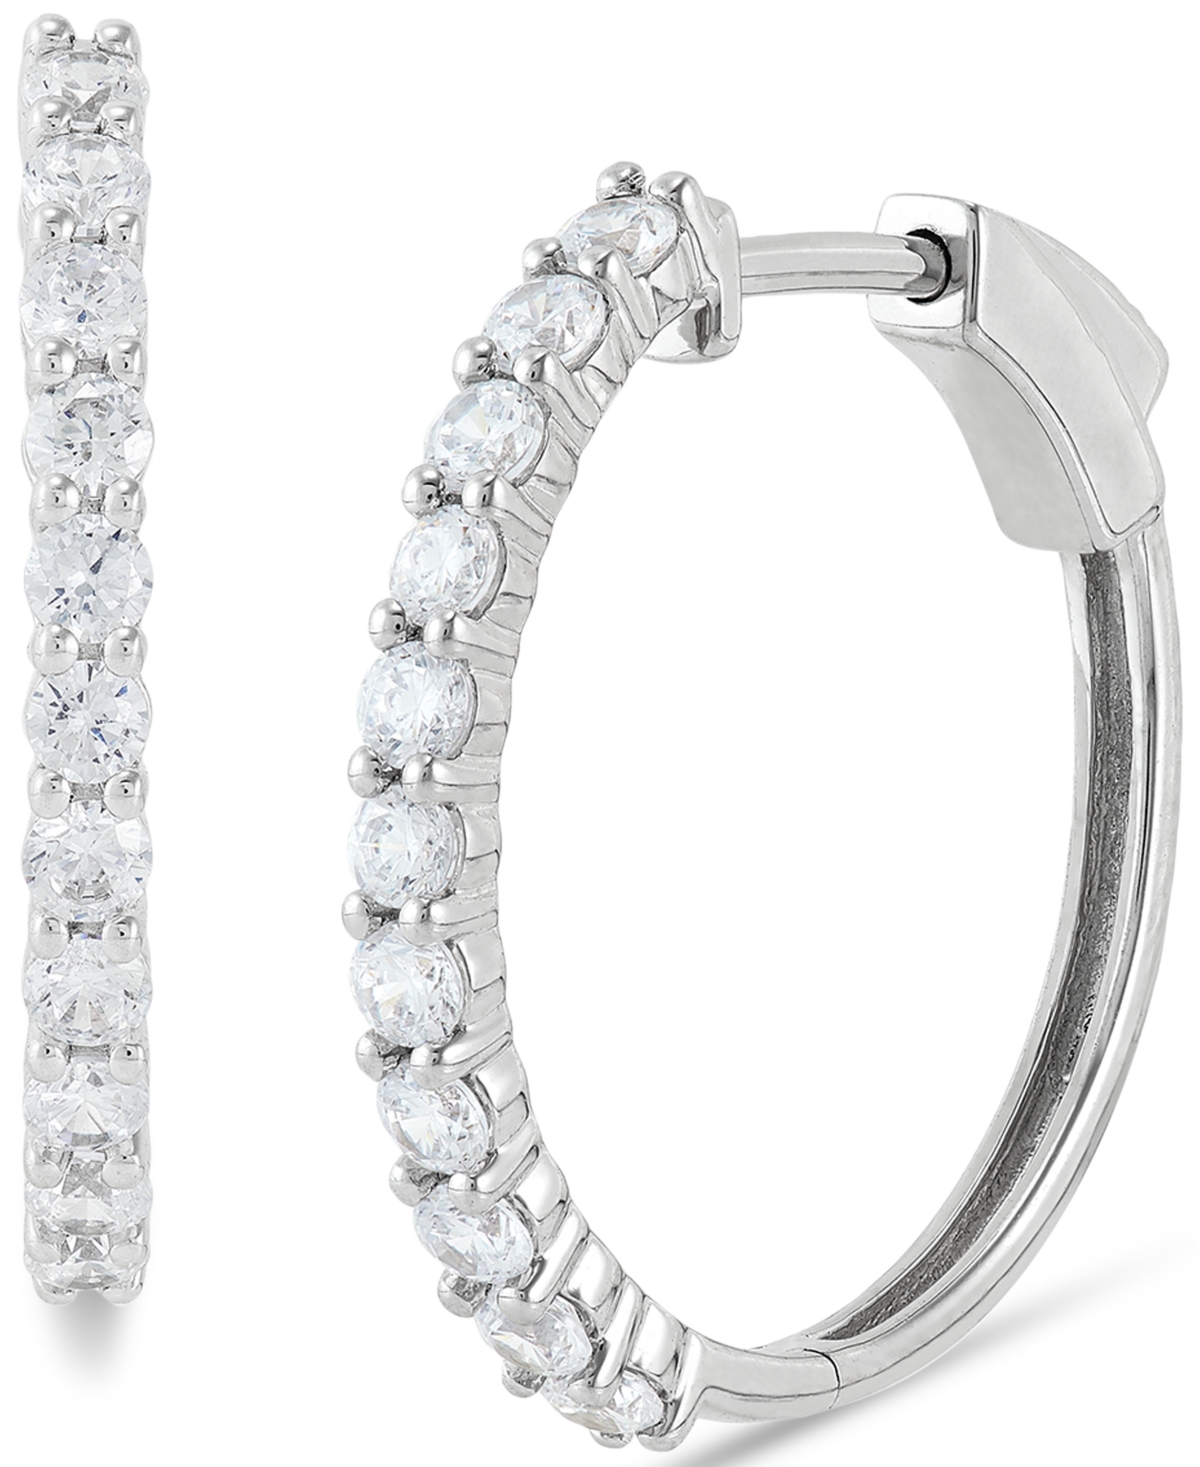 Lab Grown Diamond Small Hoop Earrings (1 ct. t.w.) in 14k White Gold - White Gold